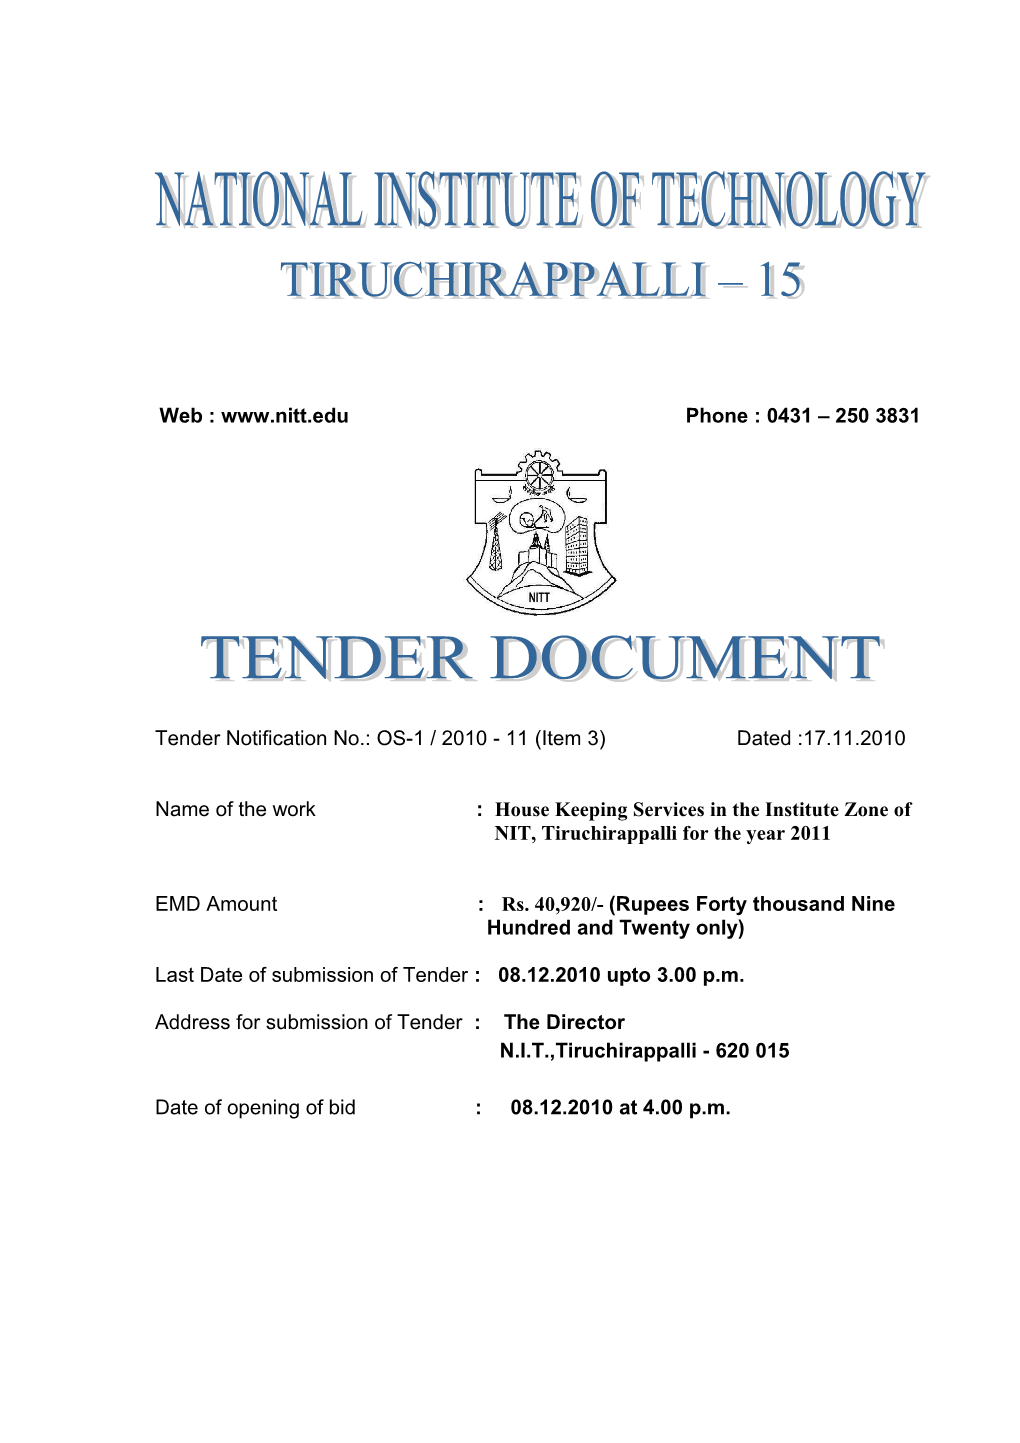 Tender Notification No.: OS-1 / 2010 - 11 (Item 3) Dated :17.11.2010